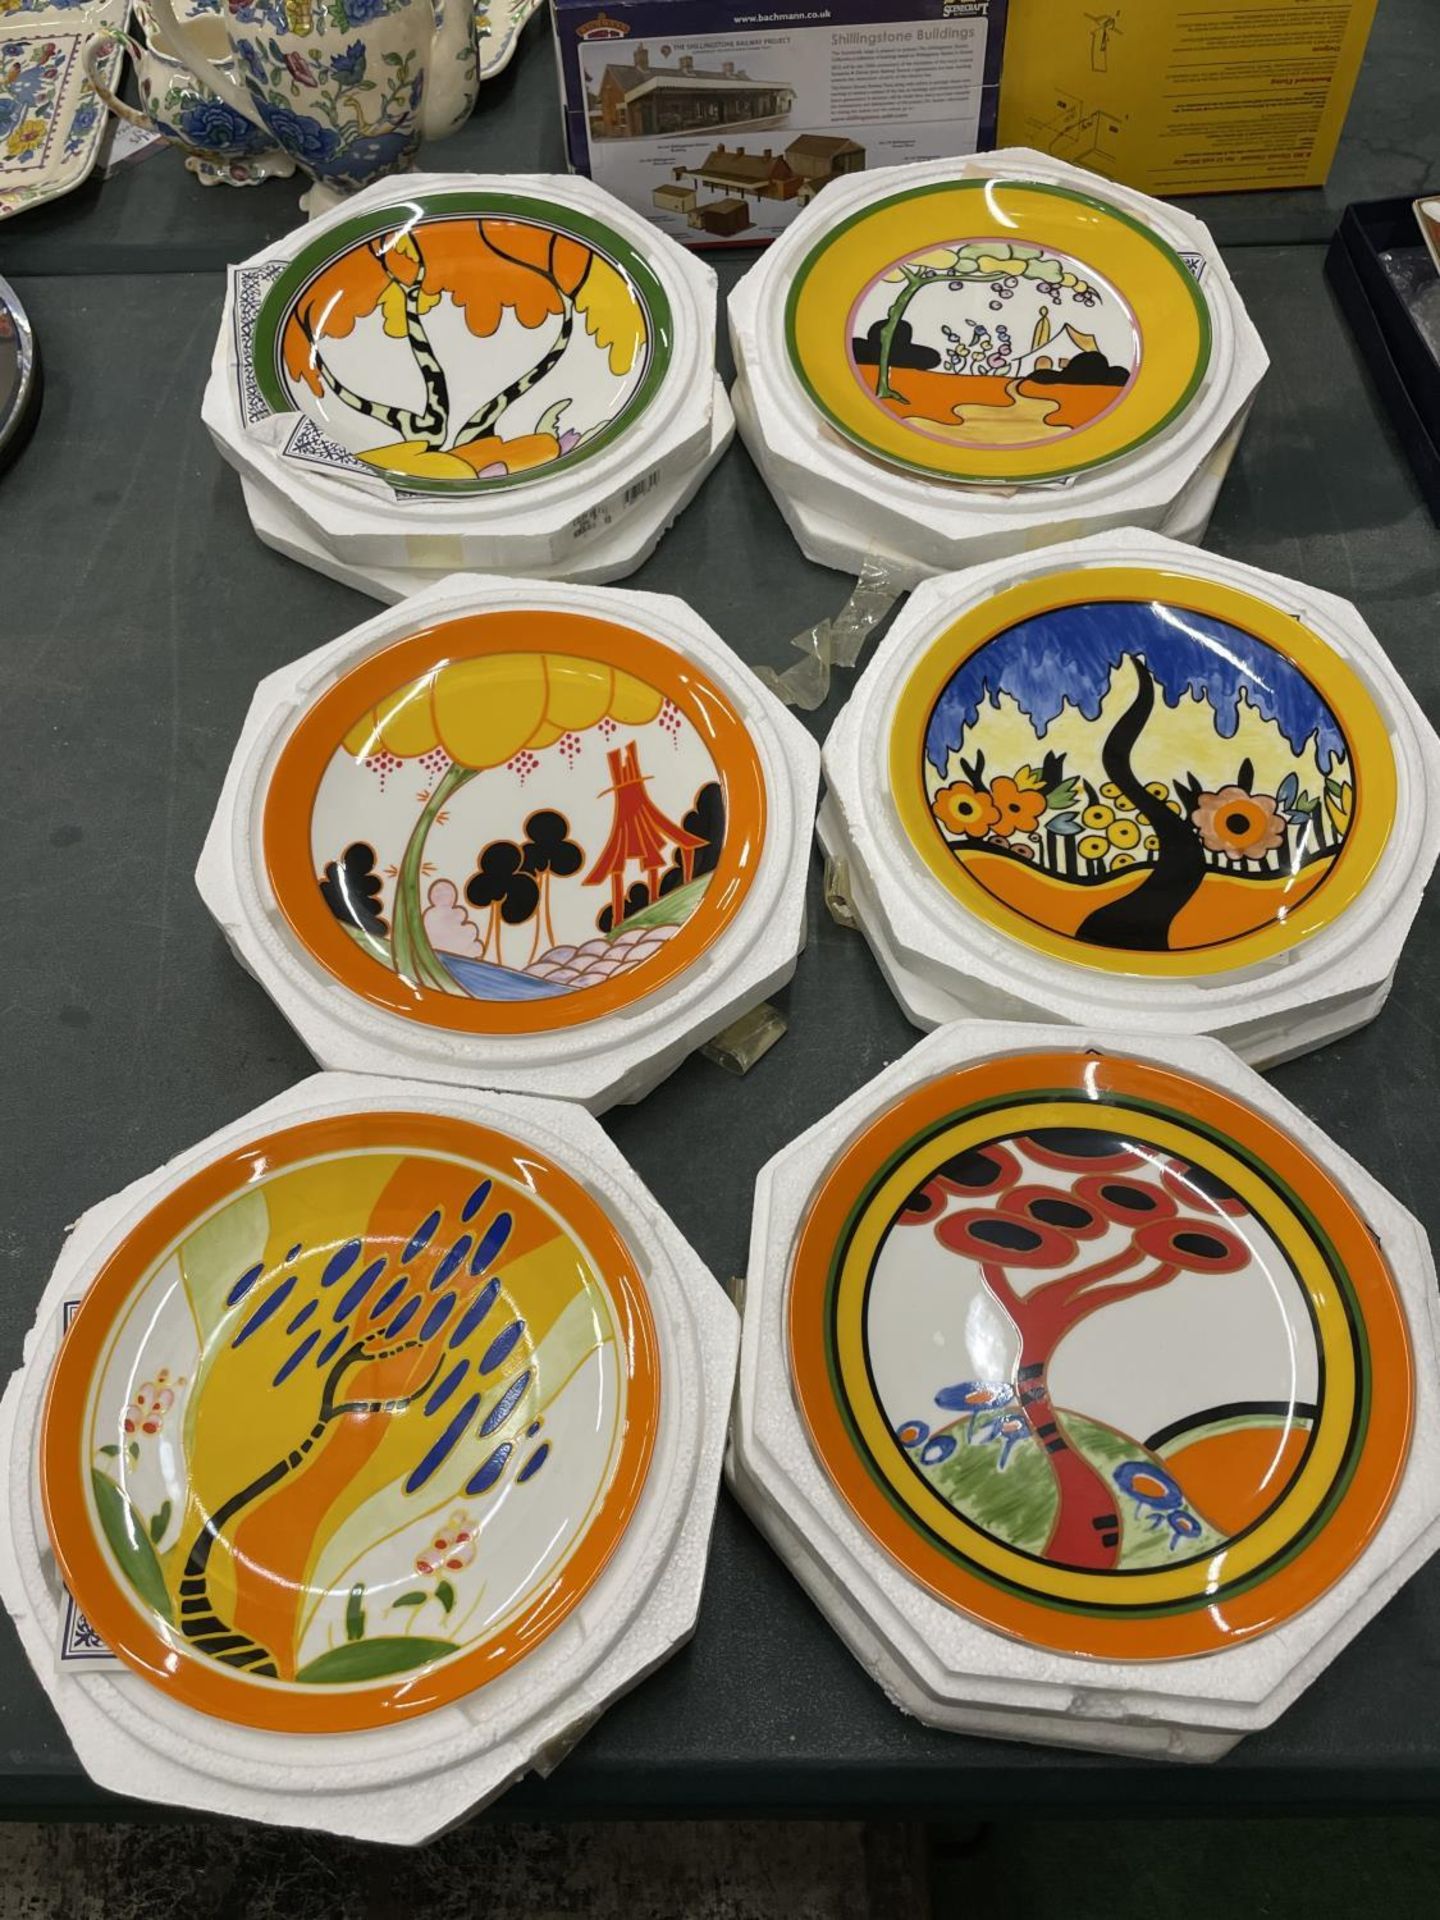 SIX LIMITED EDITION WEDGWOOD CLARICE CLIFFE PLATES